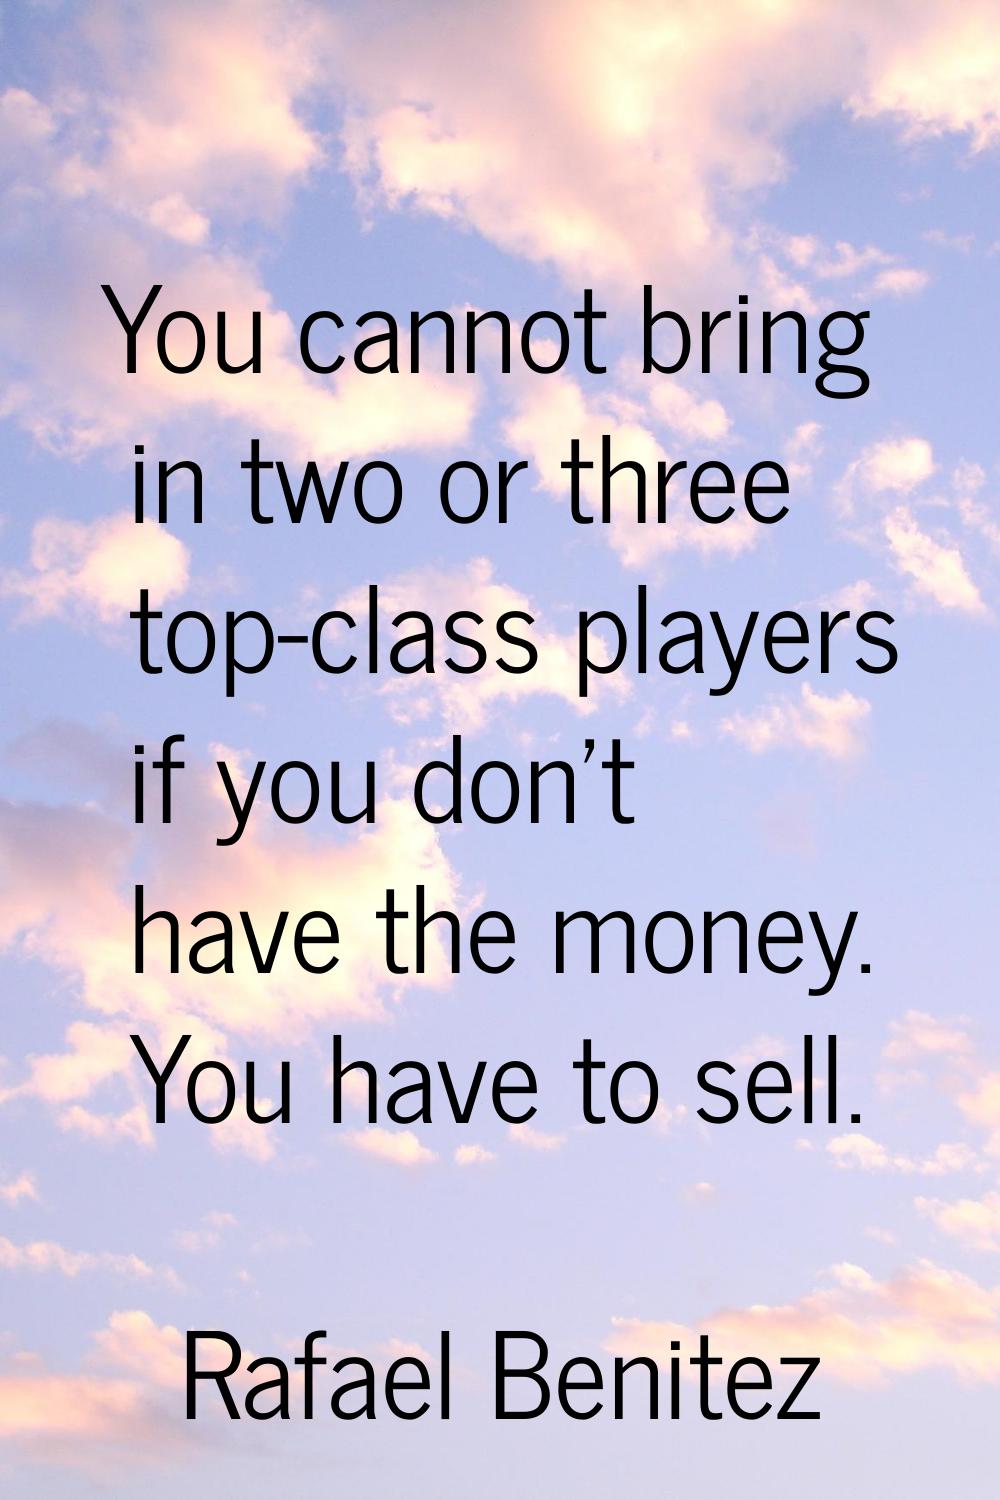 You cannot bring in two or three top-class players if you don't have the money. You have to sell.